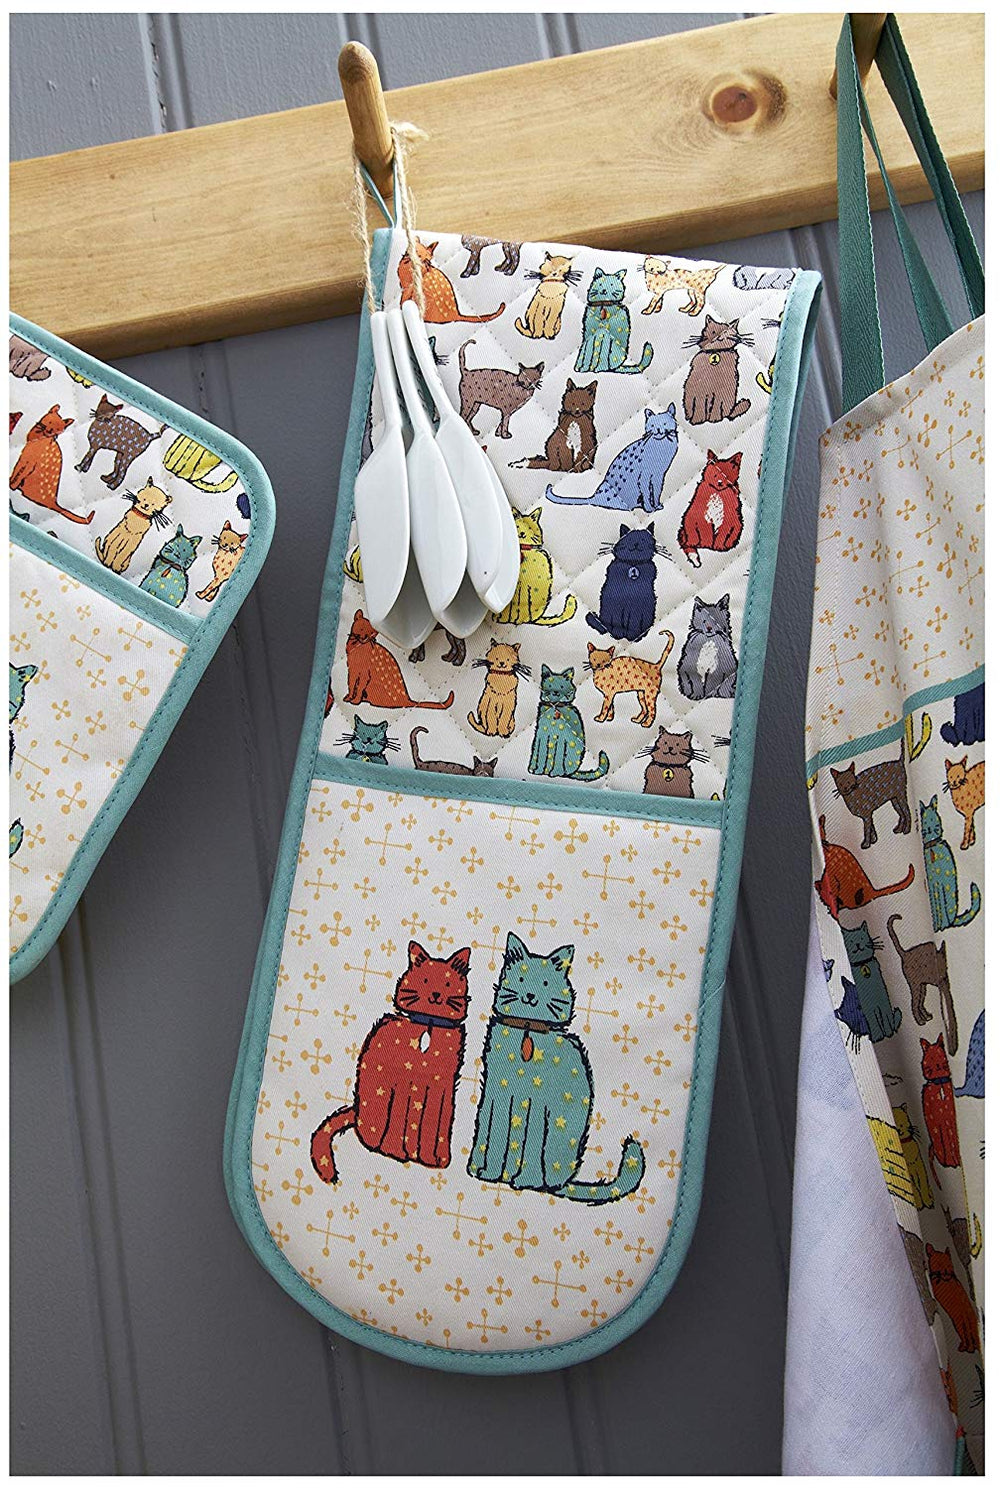 Catwalk Cat Themed Double Oven Gloves